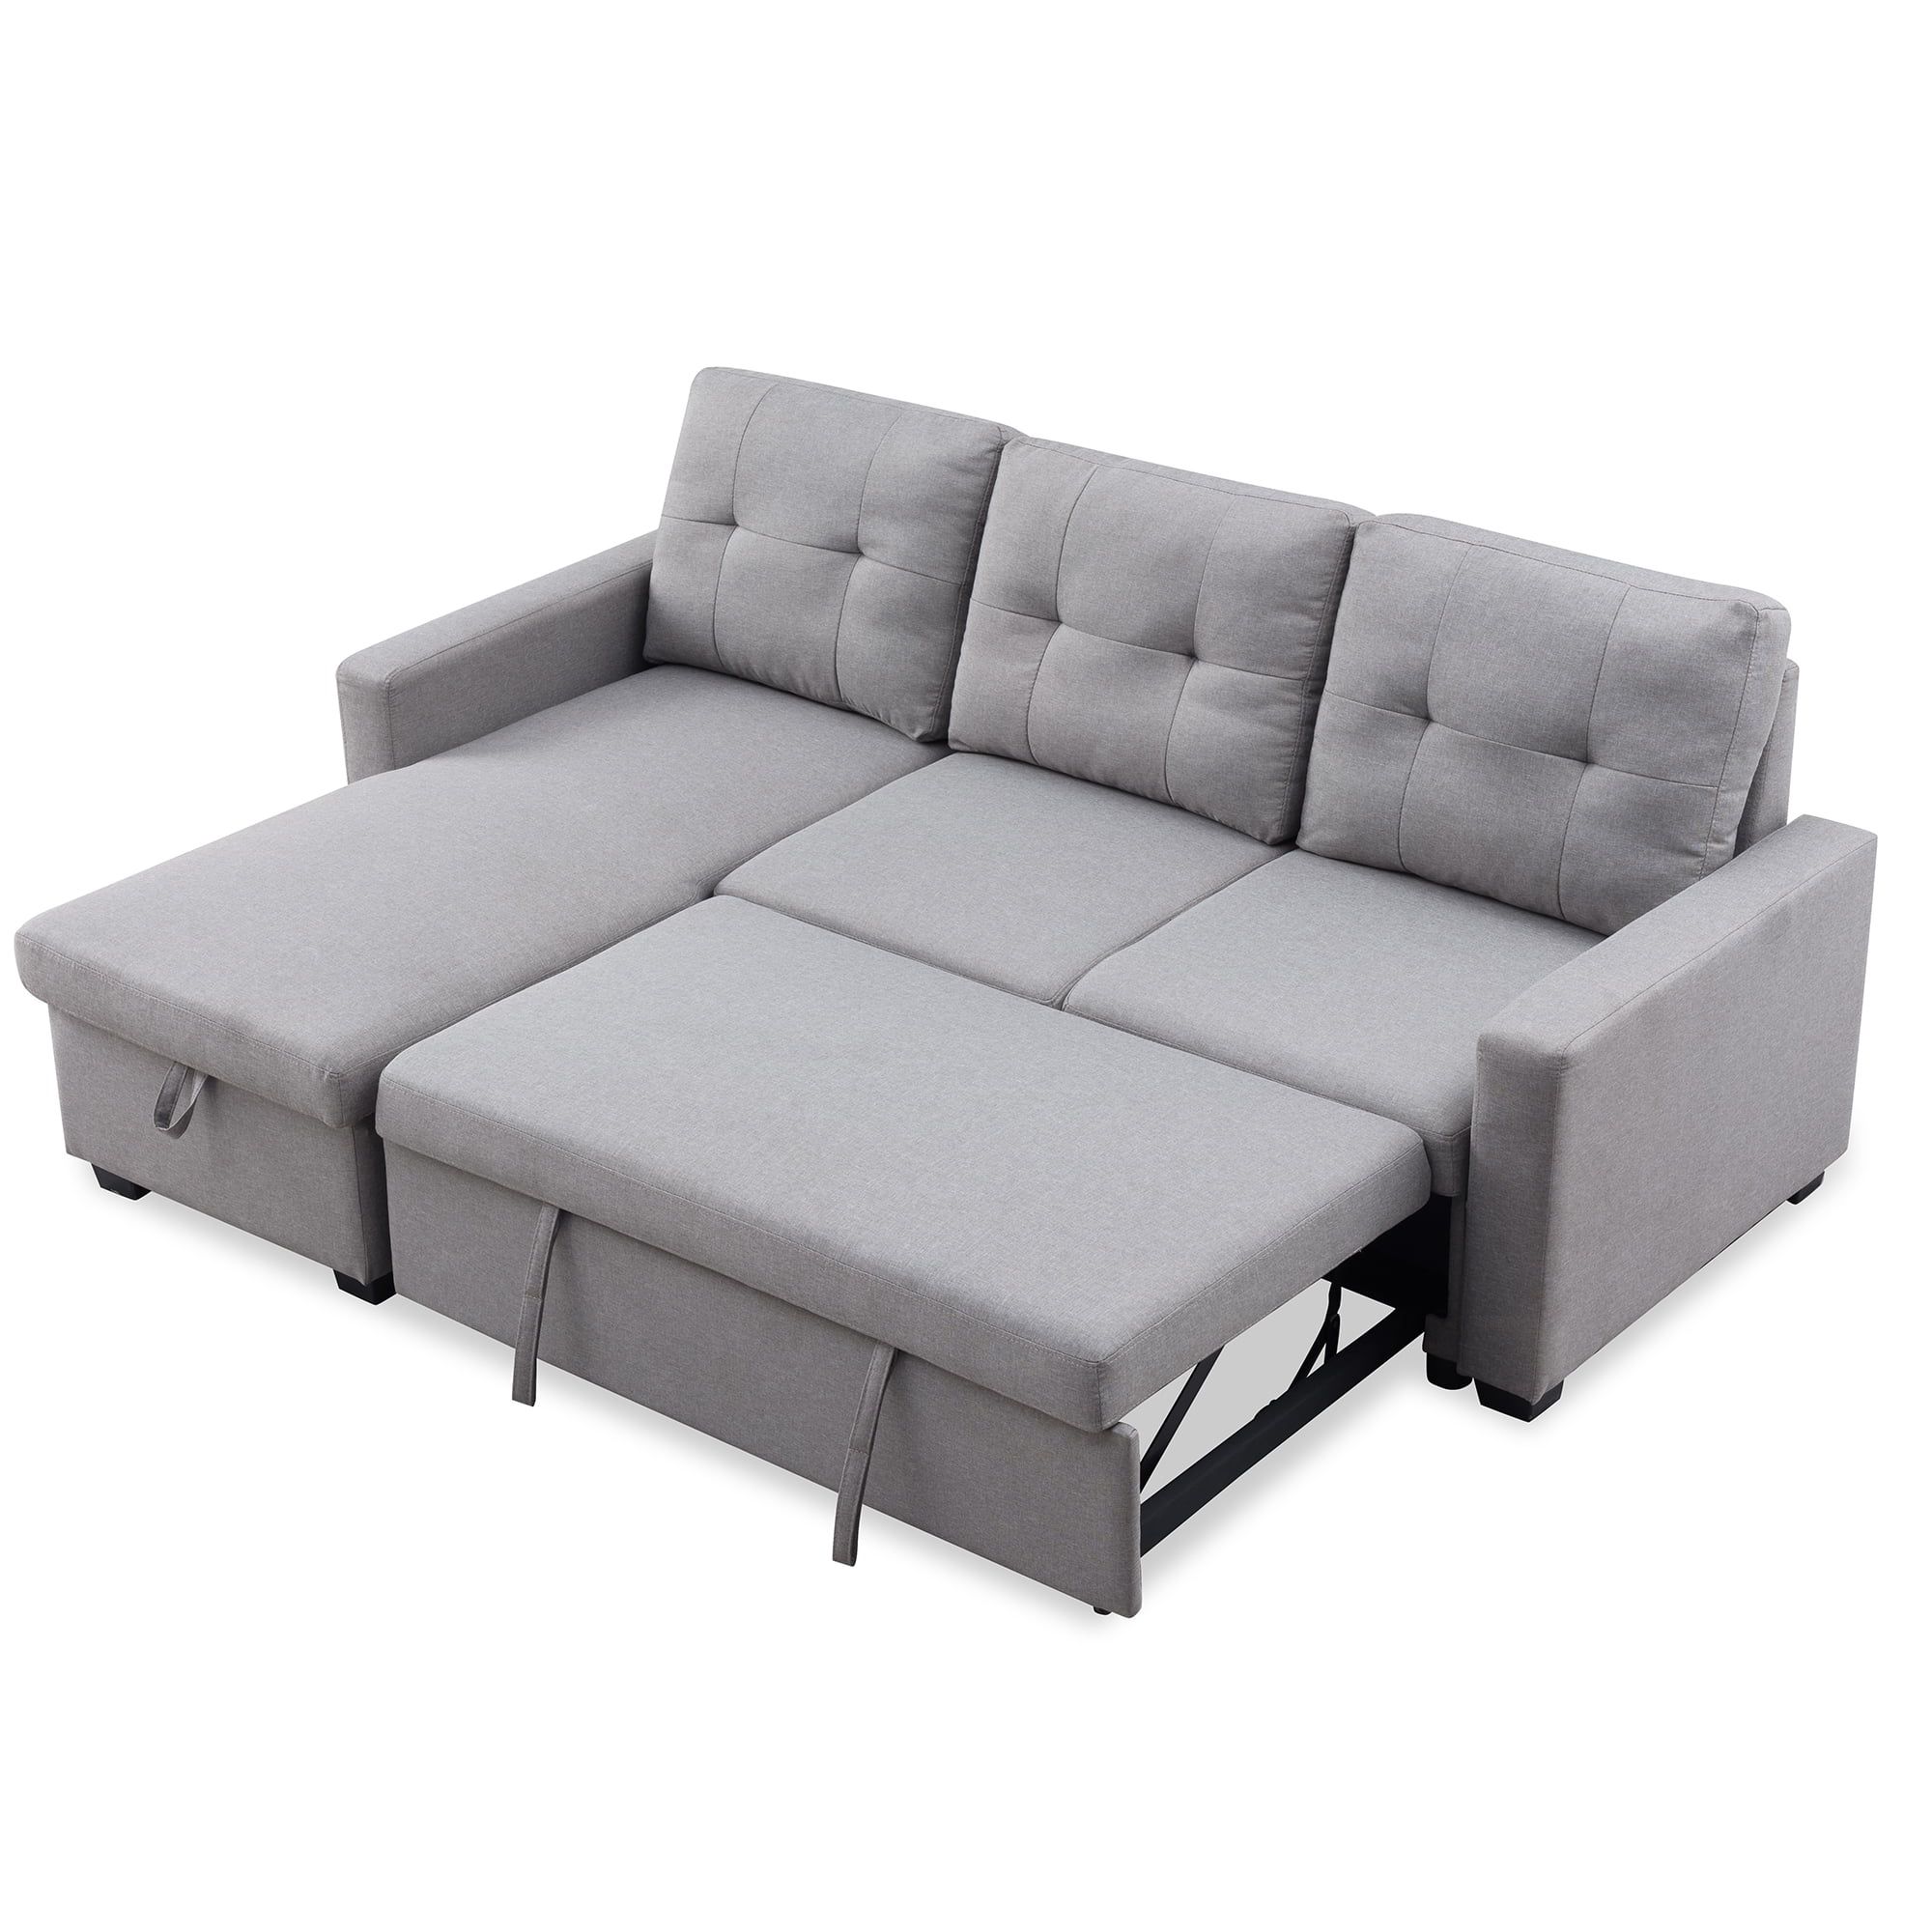 Tufted Sectional Sofa Bed With Fold Out Pull Out Sleeper And Reversible Within 2 In 1 Gray Pull Out Sofa Beds (View 8 of 20)